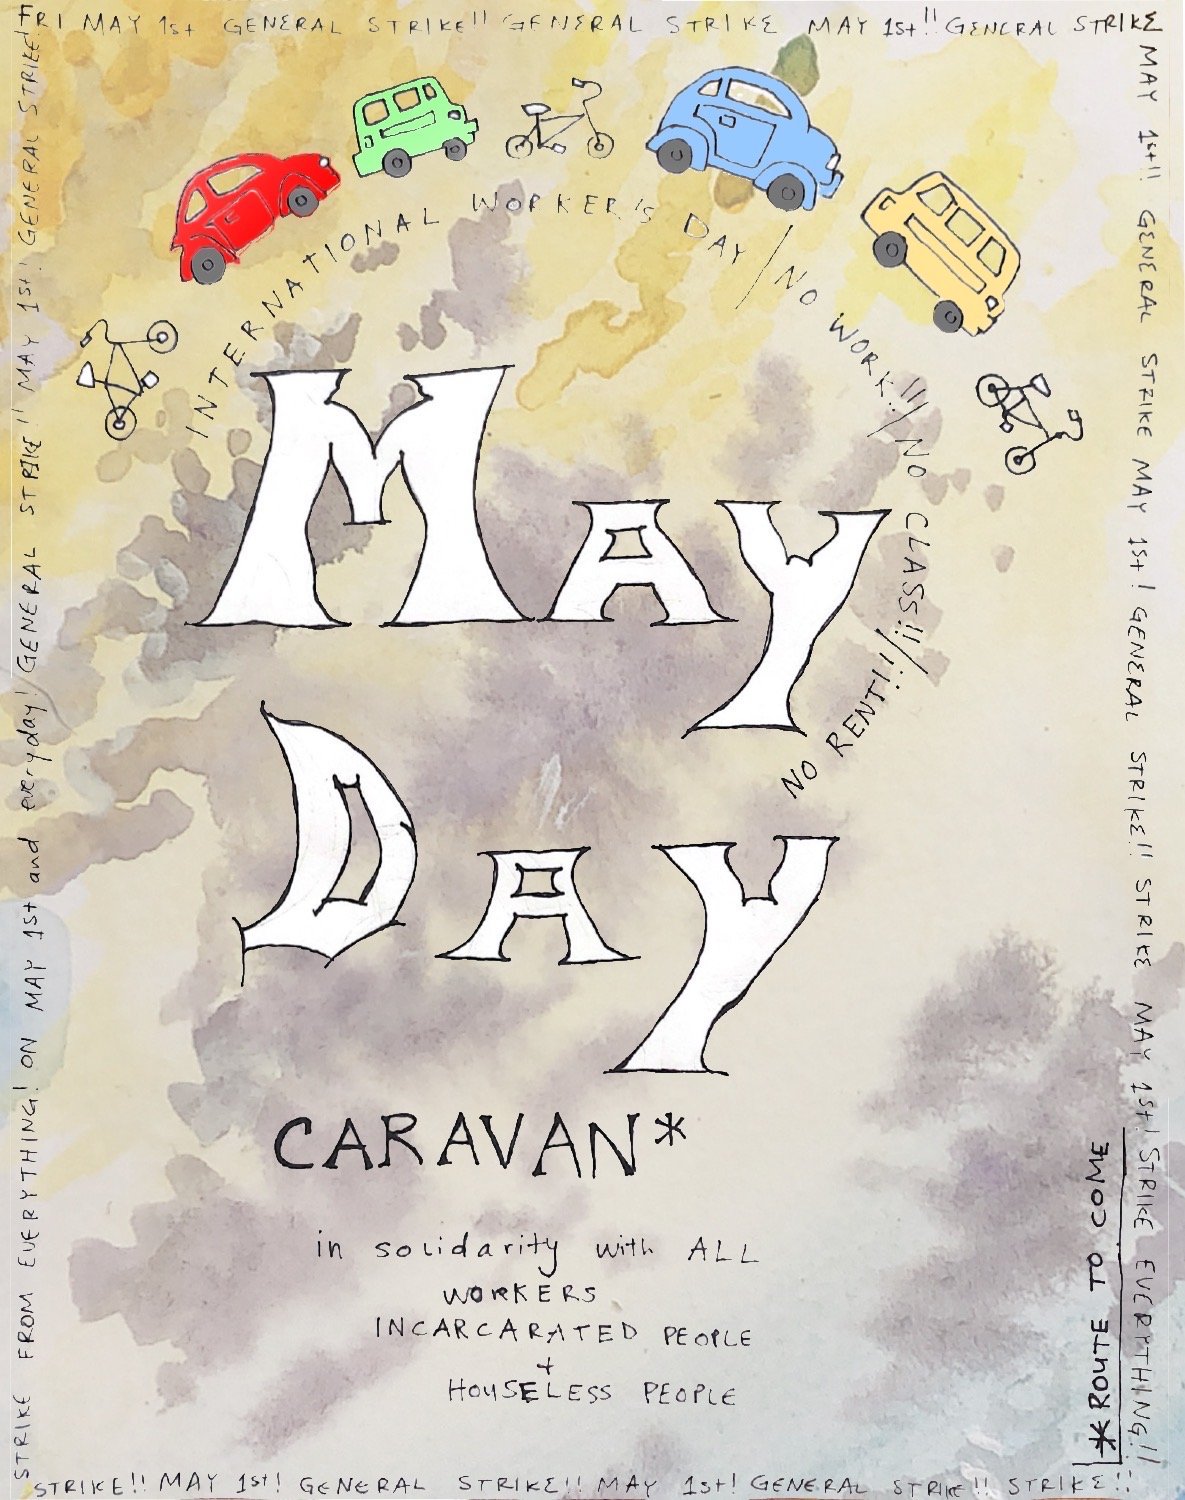 Flyer for UCSC: “May Day Caravan* in solidarity with all workers, incarcerated people, and houseless people. International worker’s day / no work!! / no class!! / no rent!! *Route to come.”